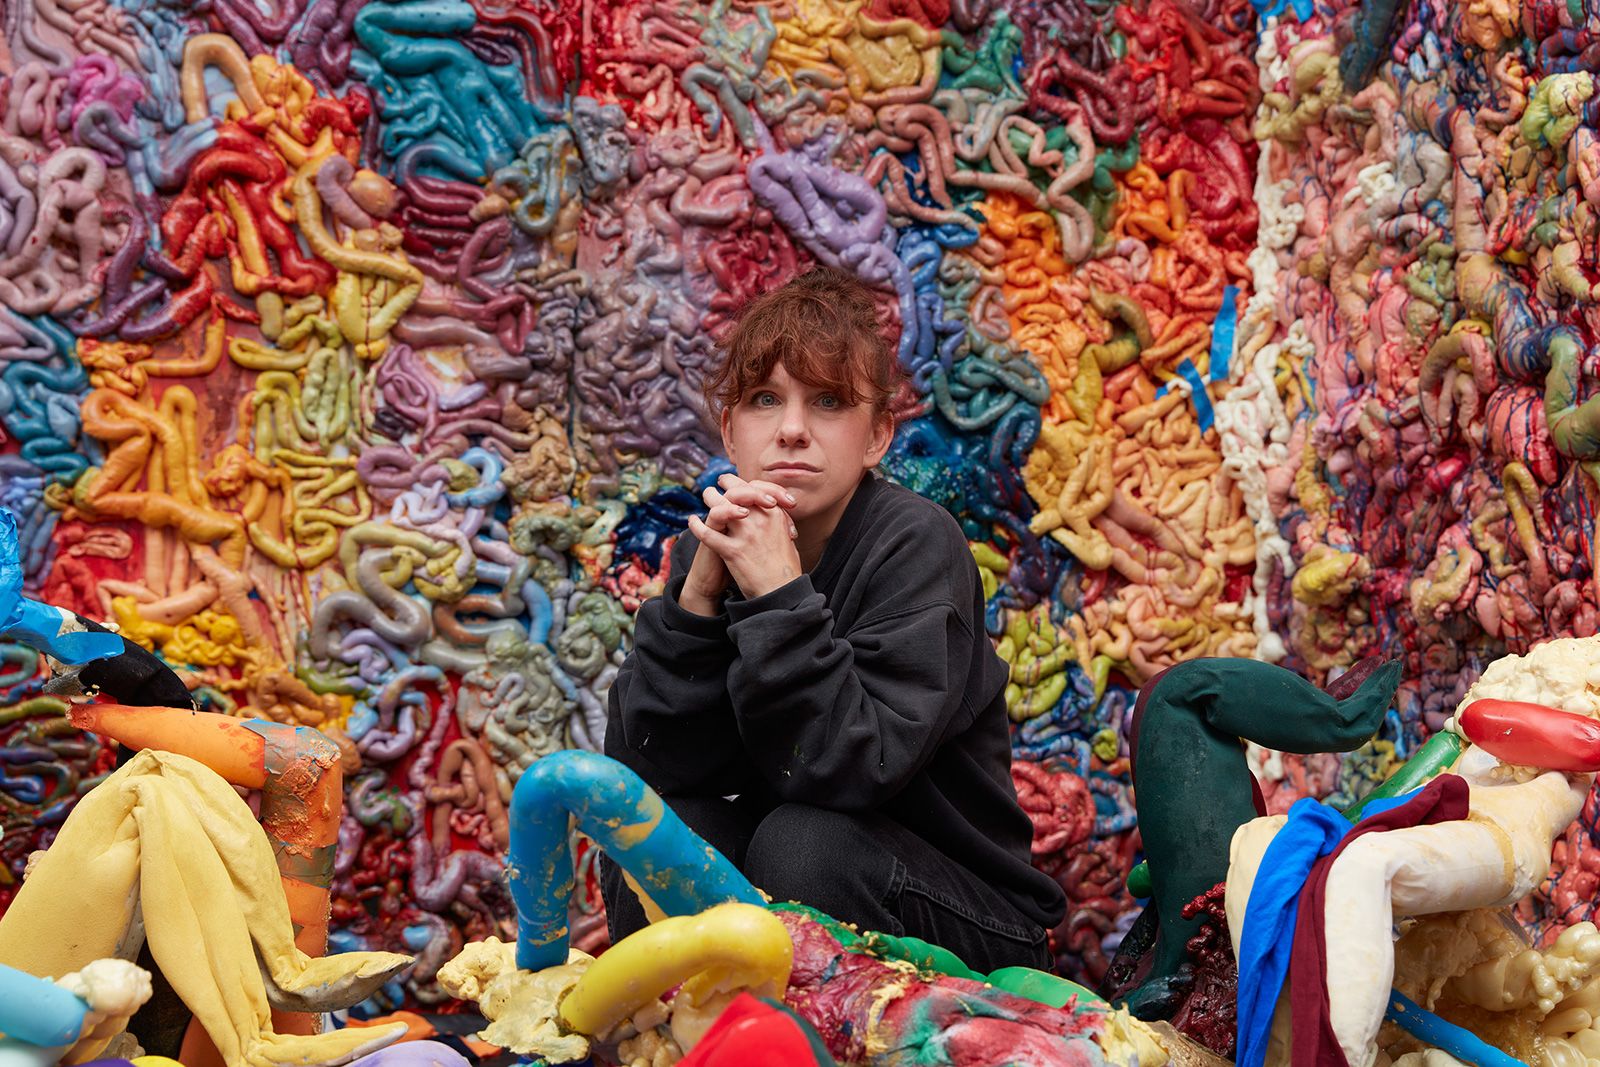 A woman sits in front of sculptures that look like colorful intestines